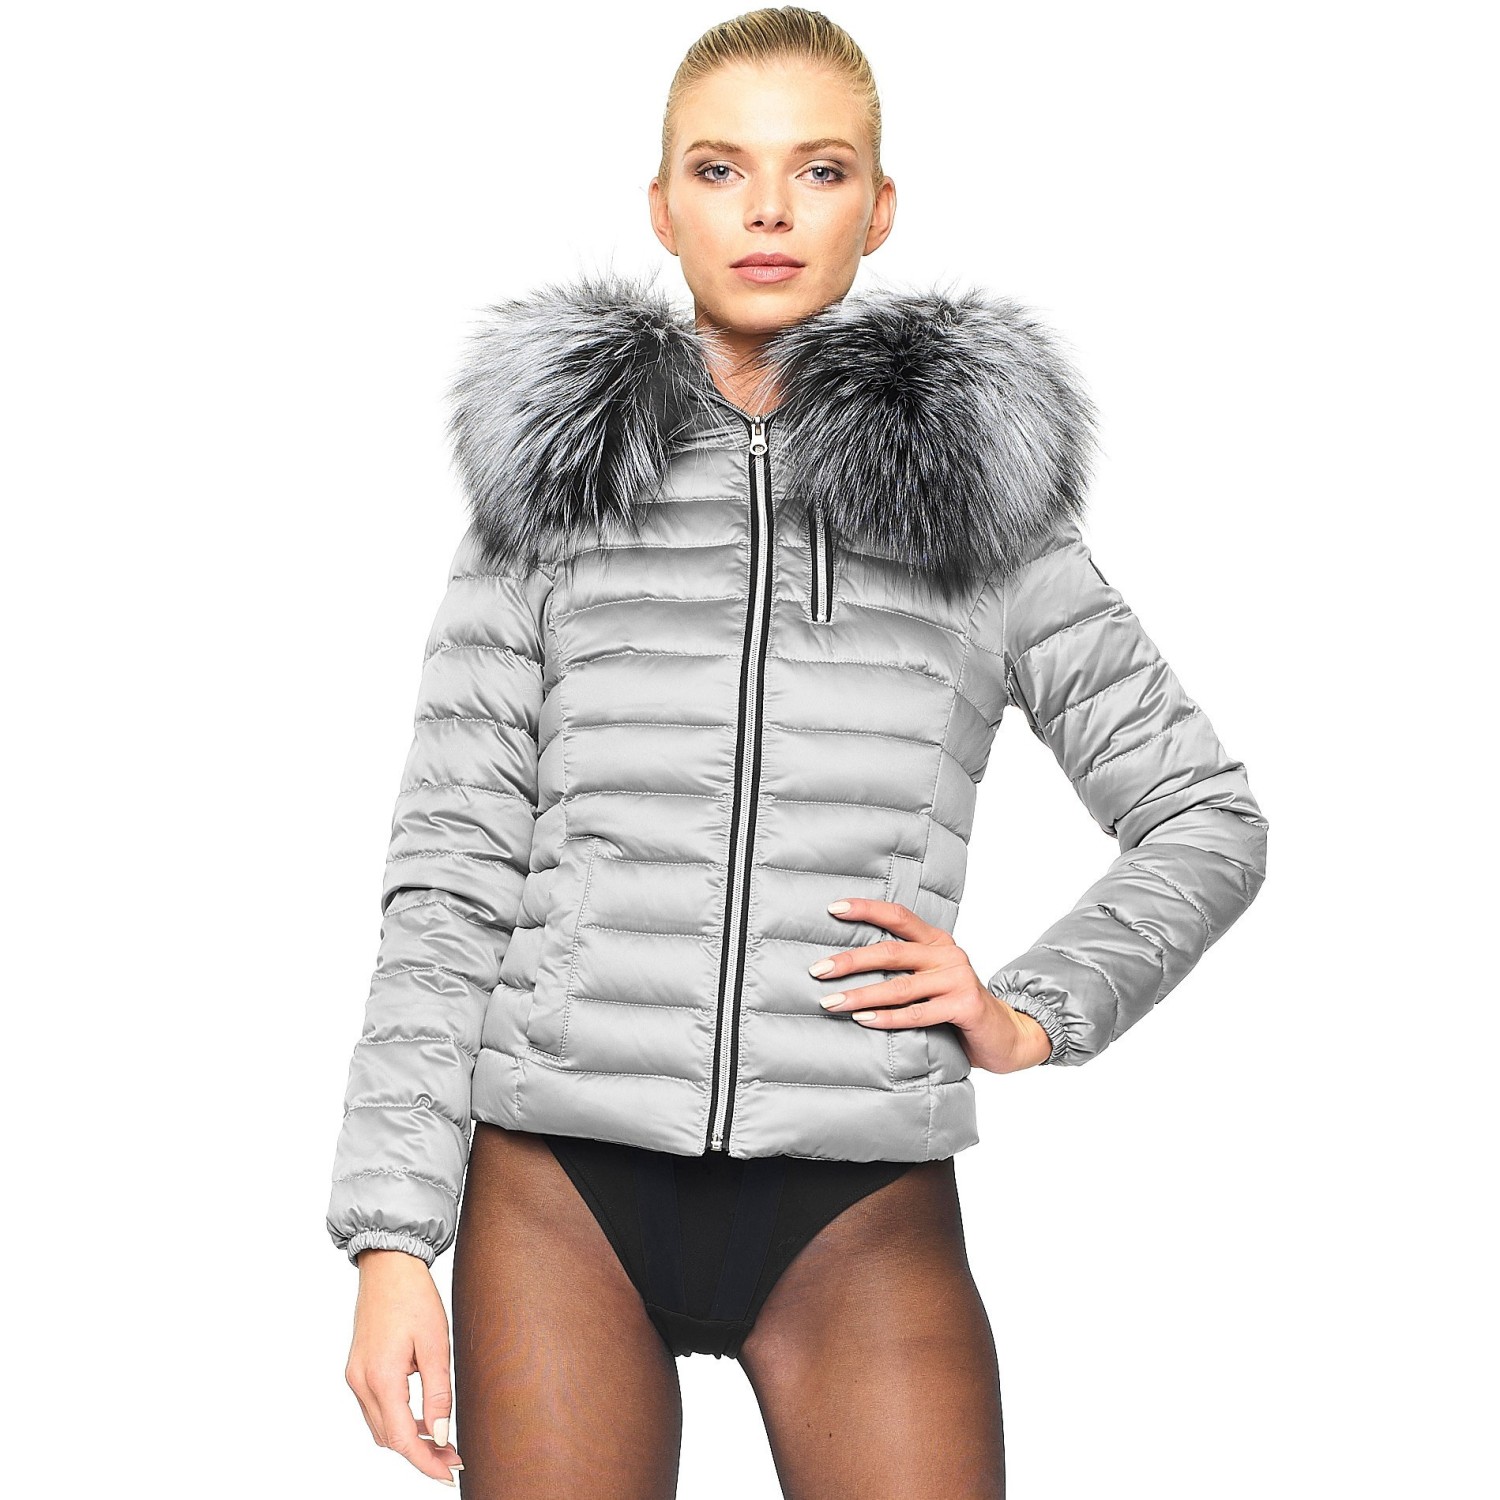 Down jacket with fur hood “Majestic Silver”